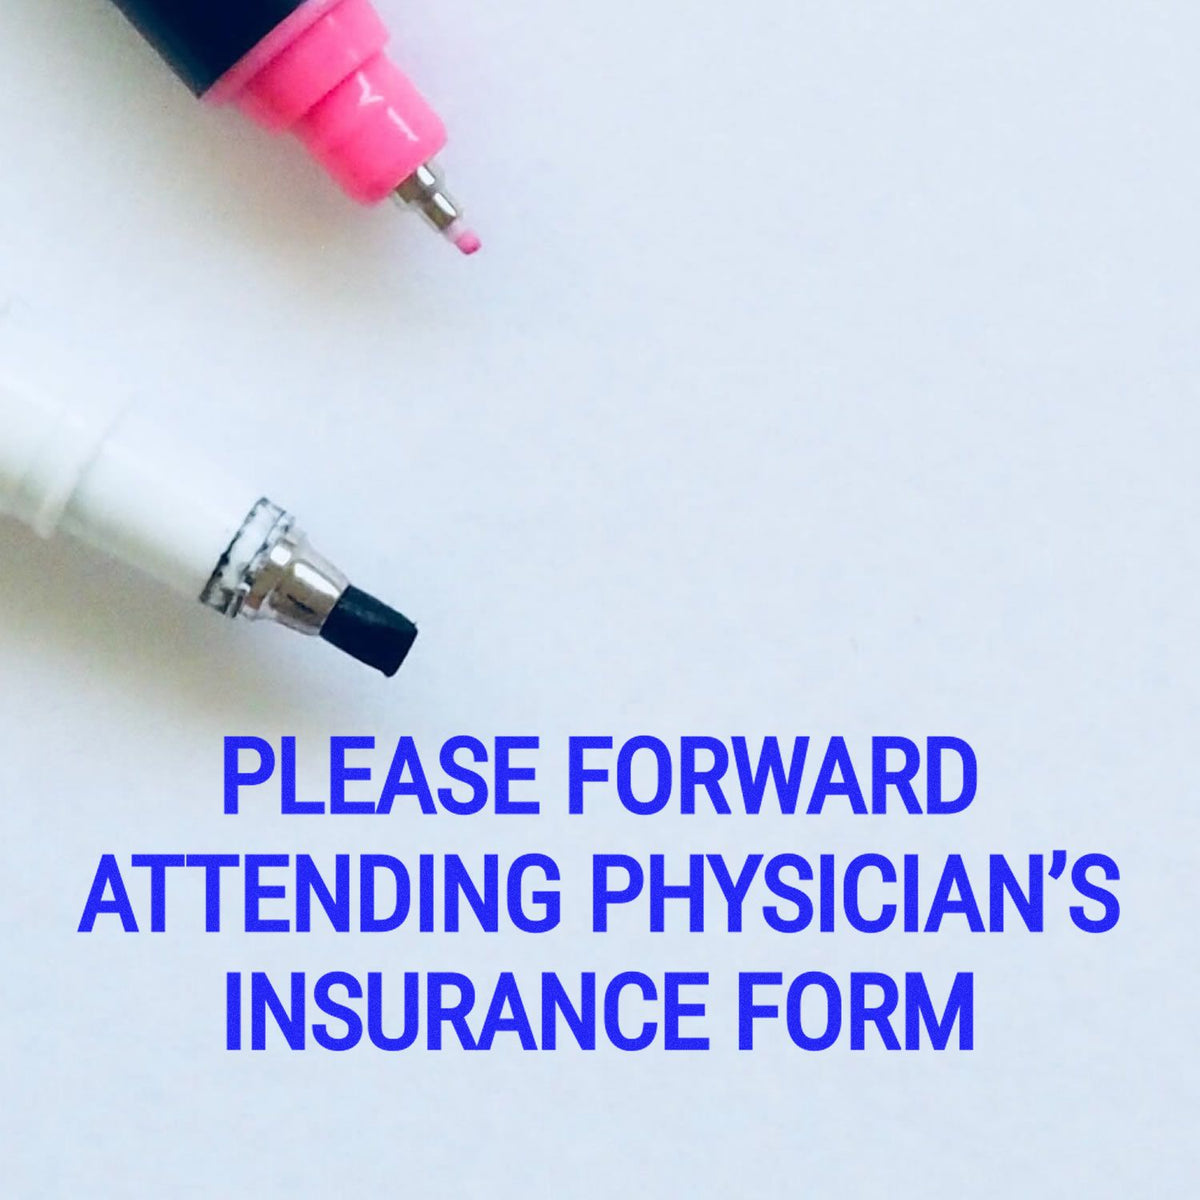 Self-Inking Please Forward Attending Physicians Stamp In Use Photo